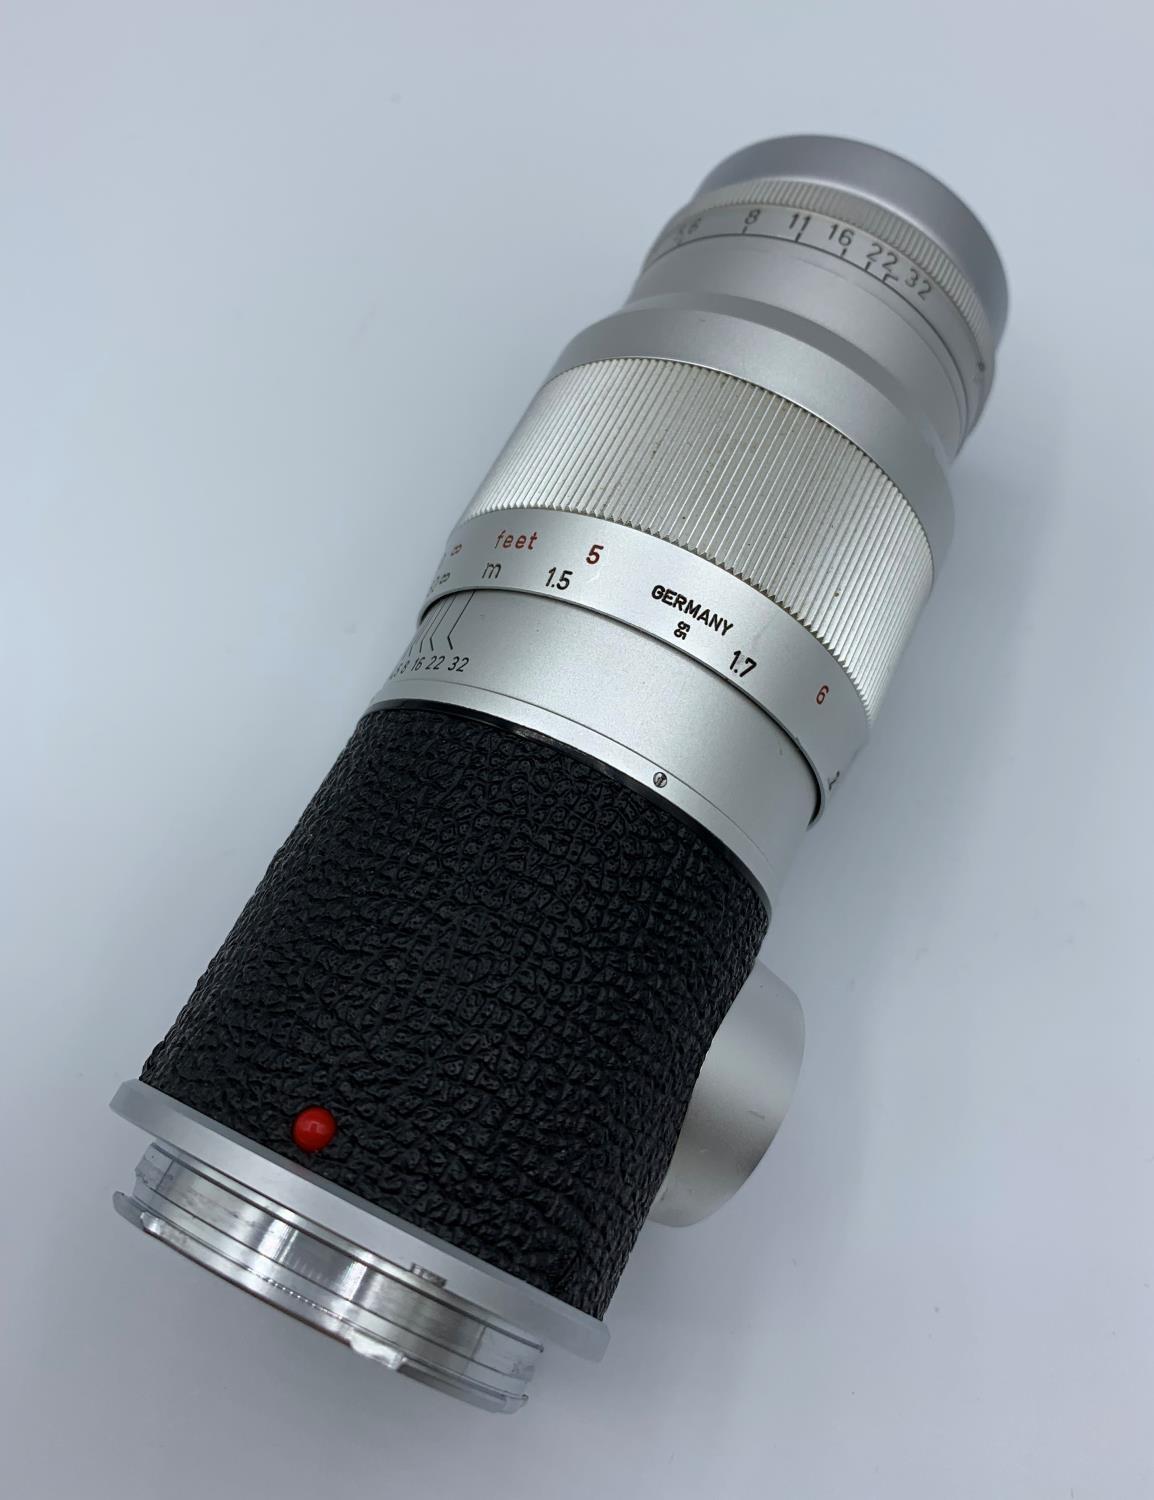 Leica lens in very good condition - Image 5 of 7